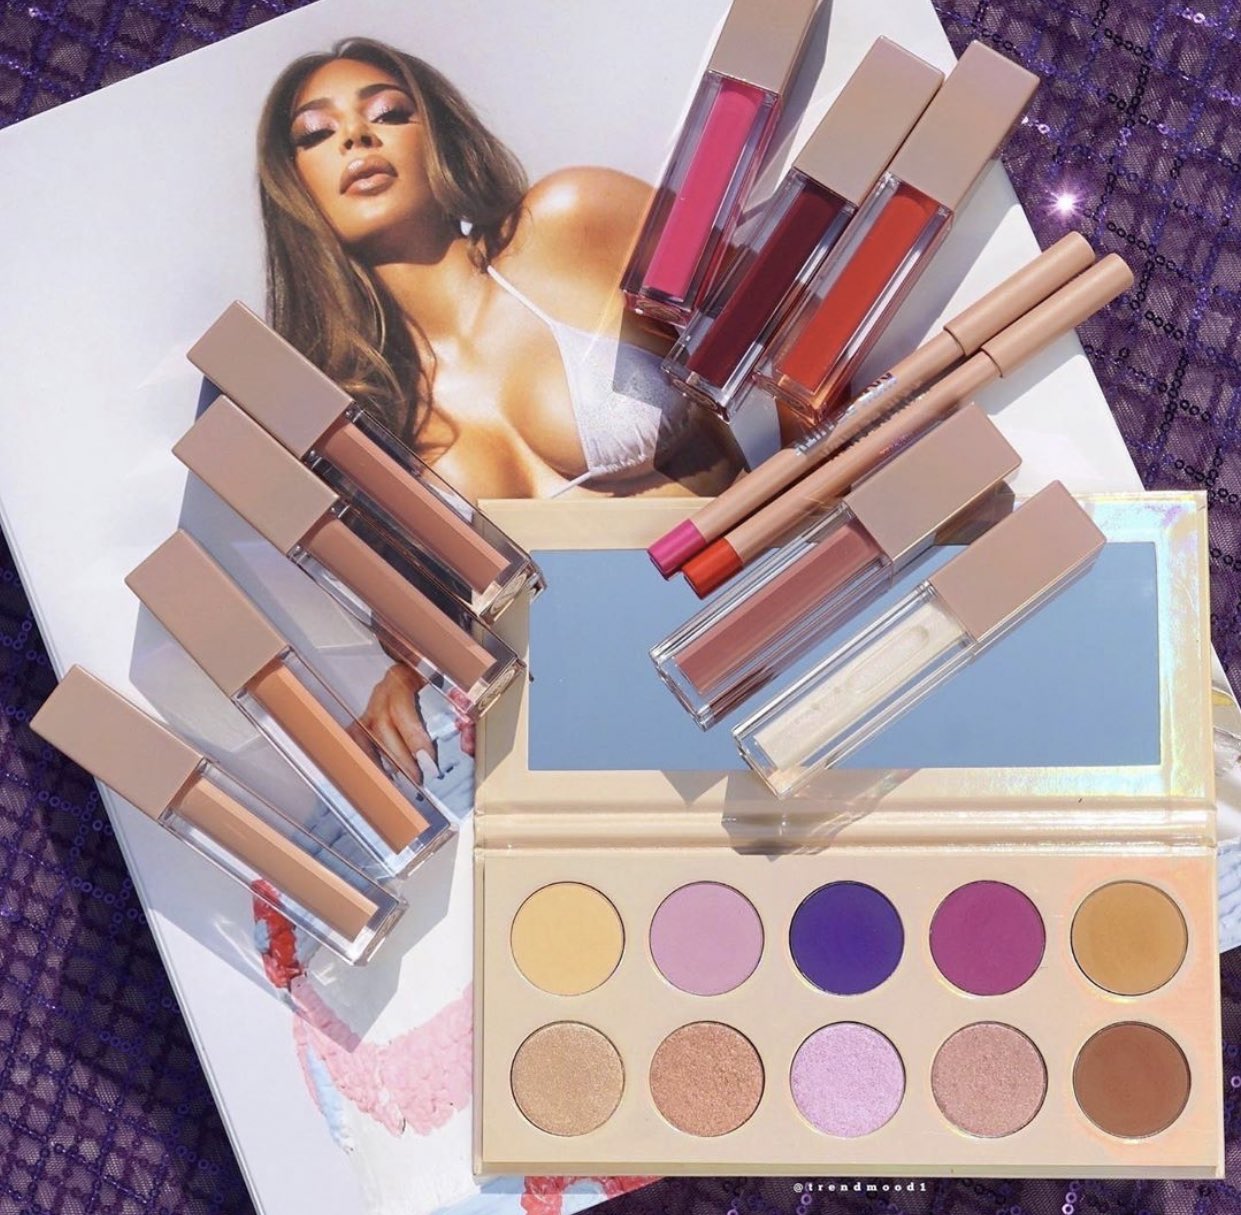 6 2 - KKW Beauty The Opalescent Collection 2020